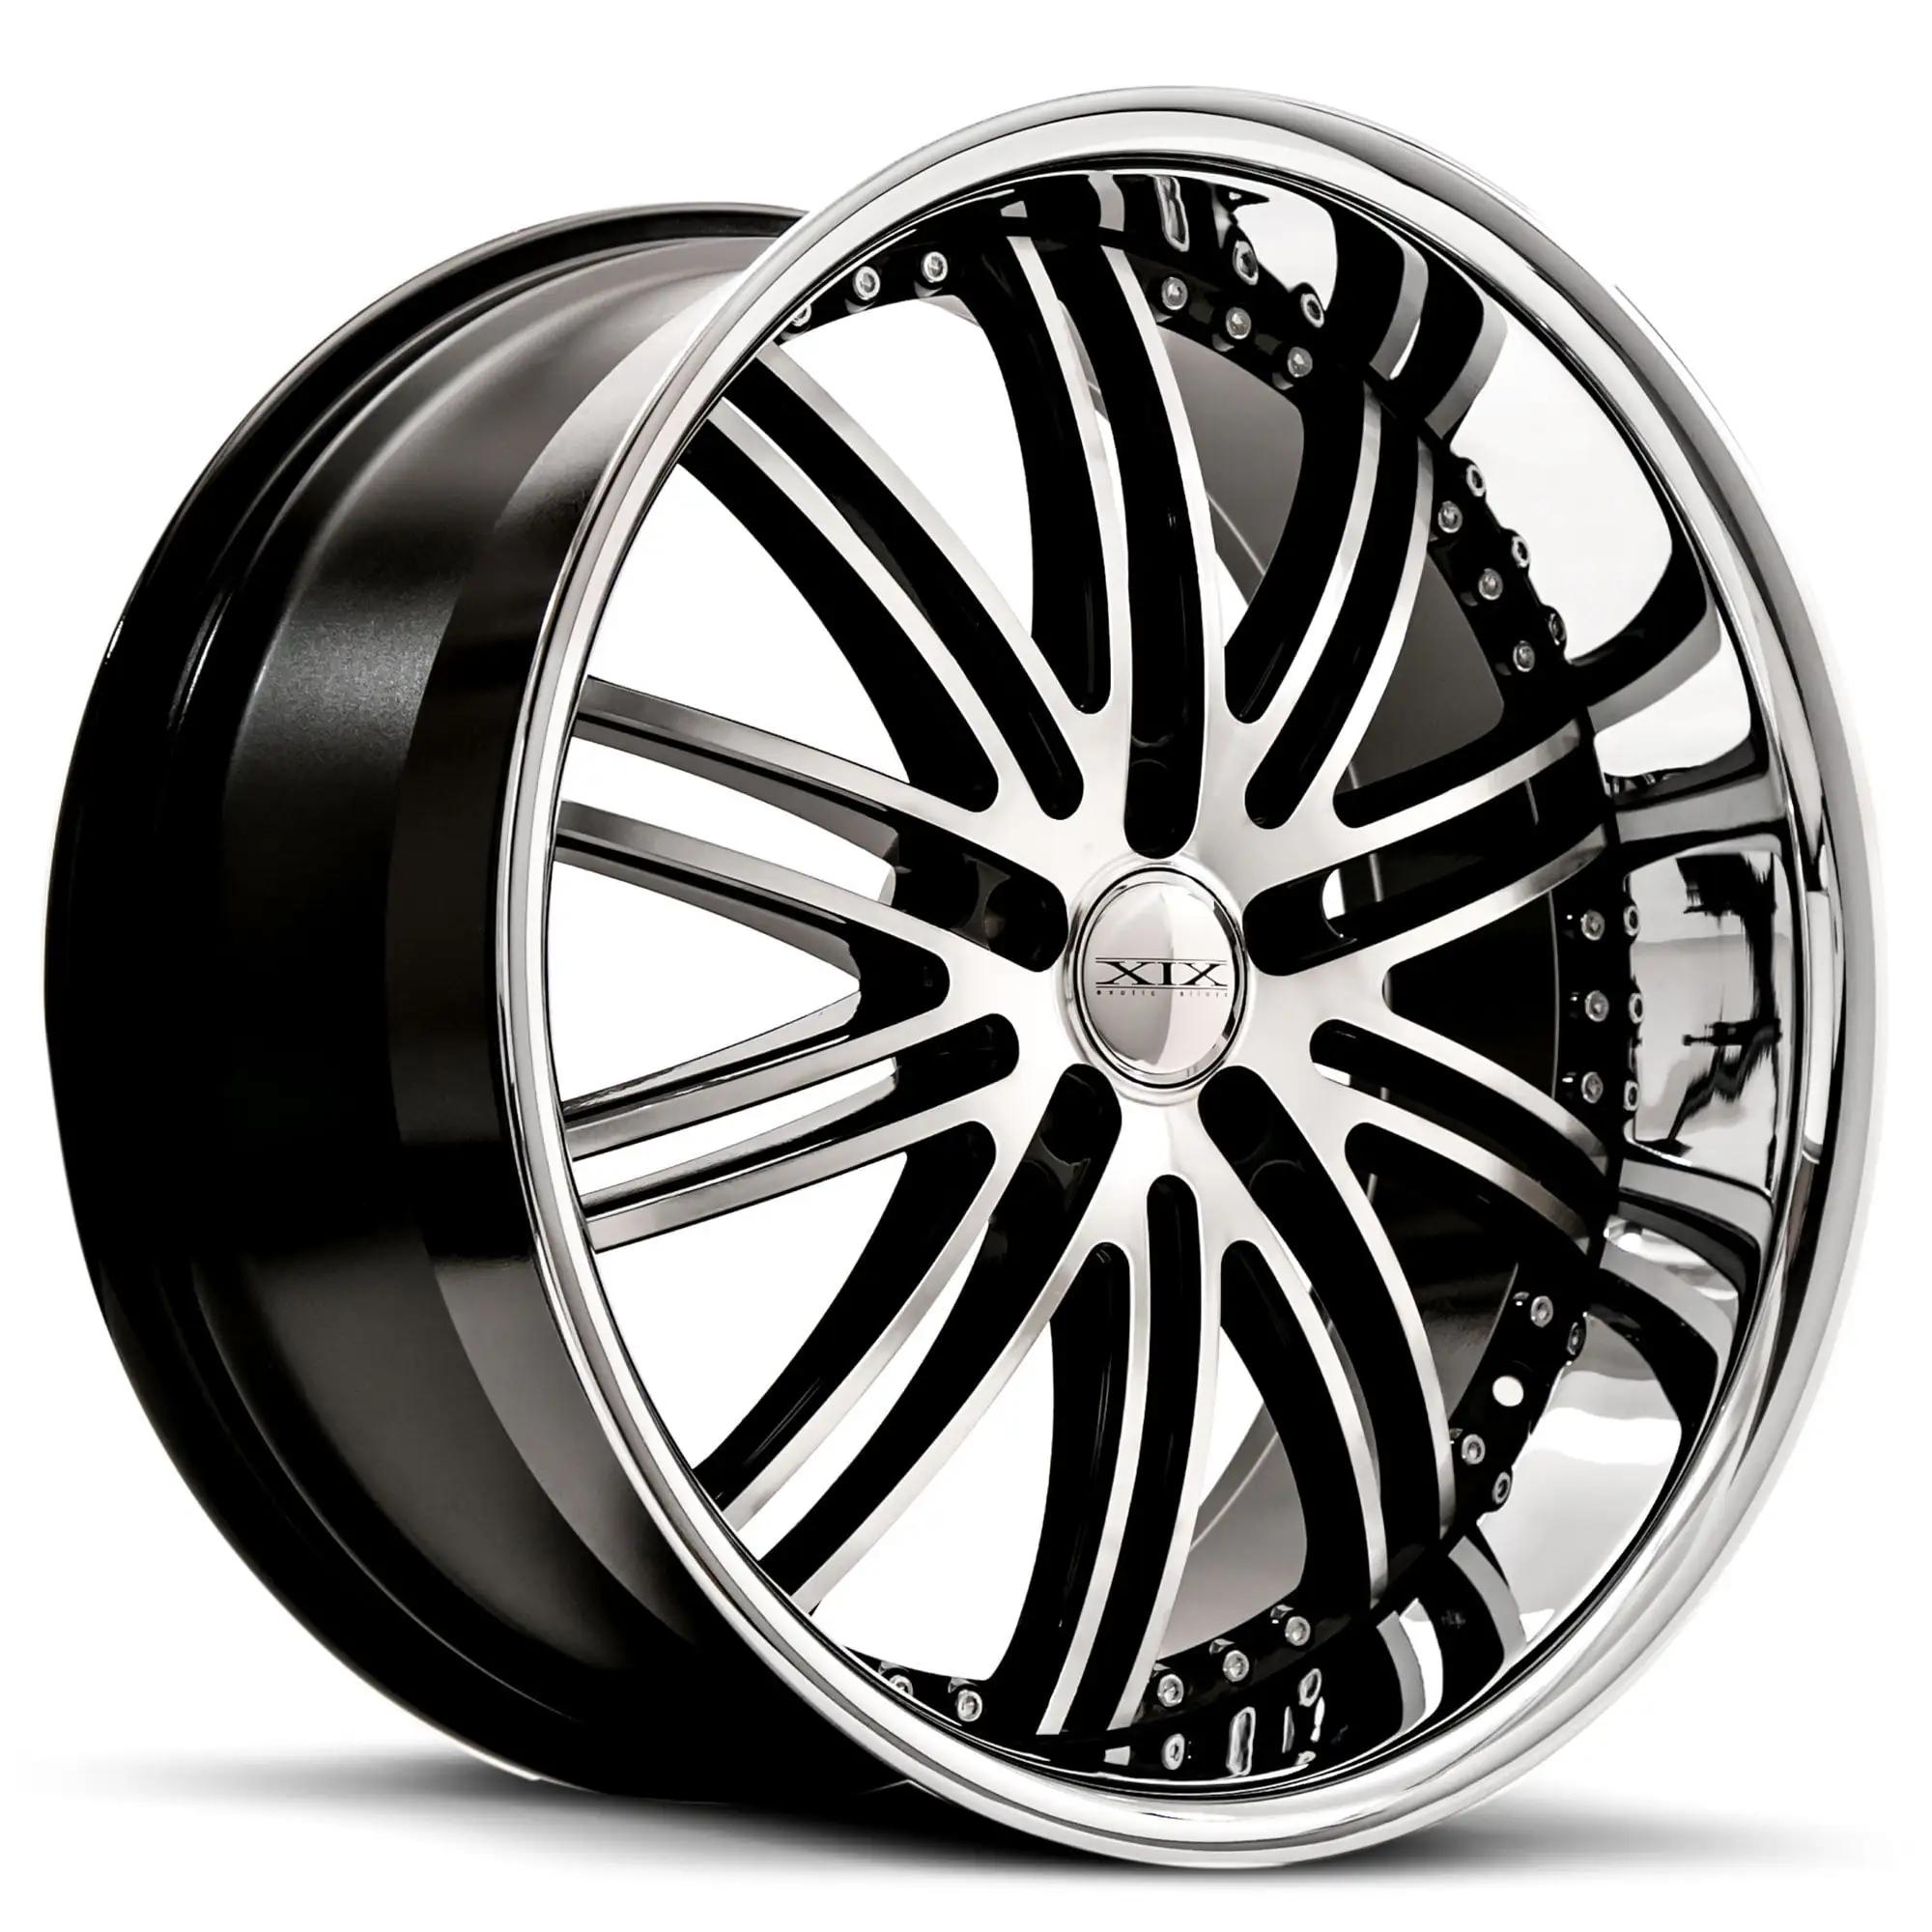 smoked rims - How can you tell if rims are fake